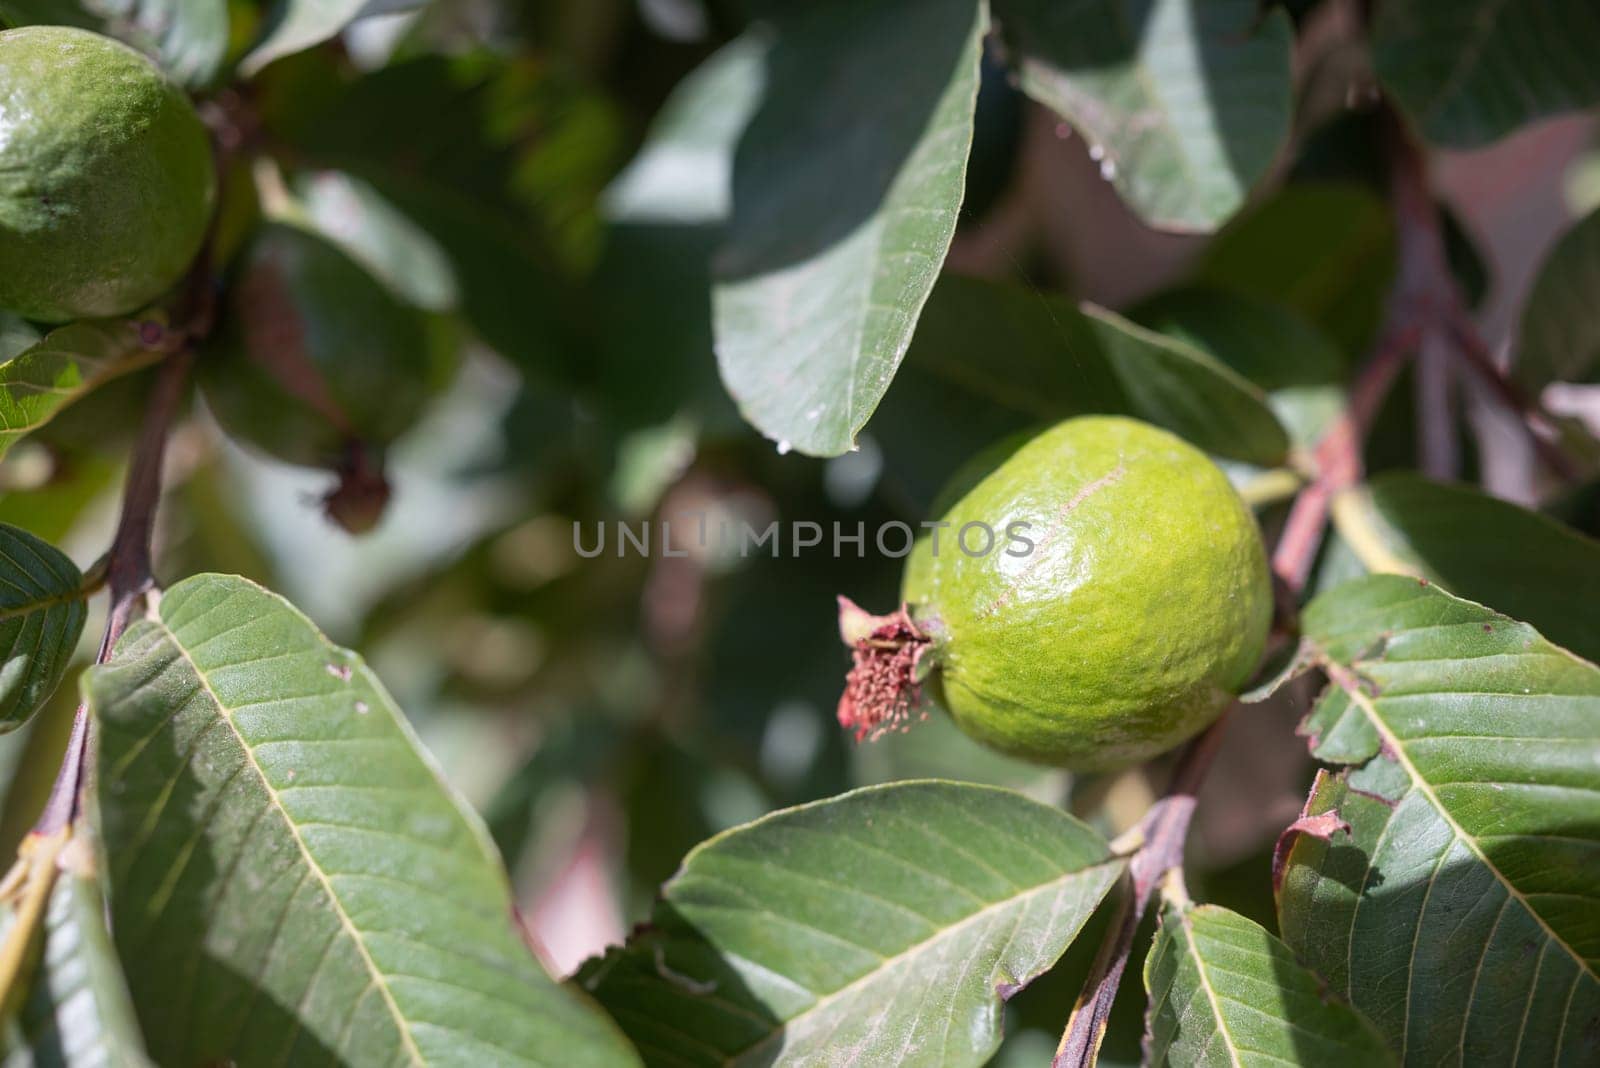 Guave fruit growing on a tree branch among green leaves. Psidium guajava, common guava, lemon guava or apple guava getting ripe in the sunlight